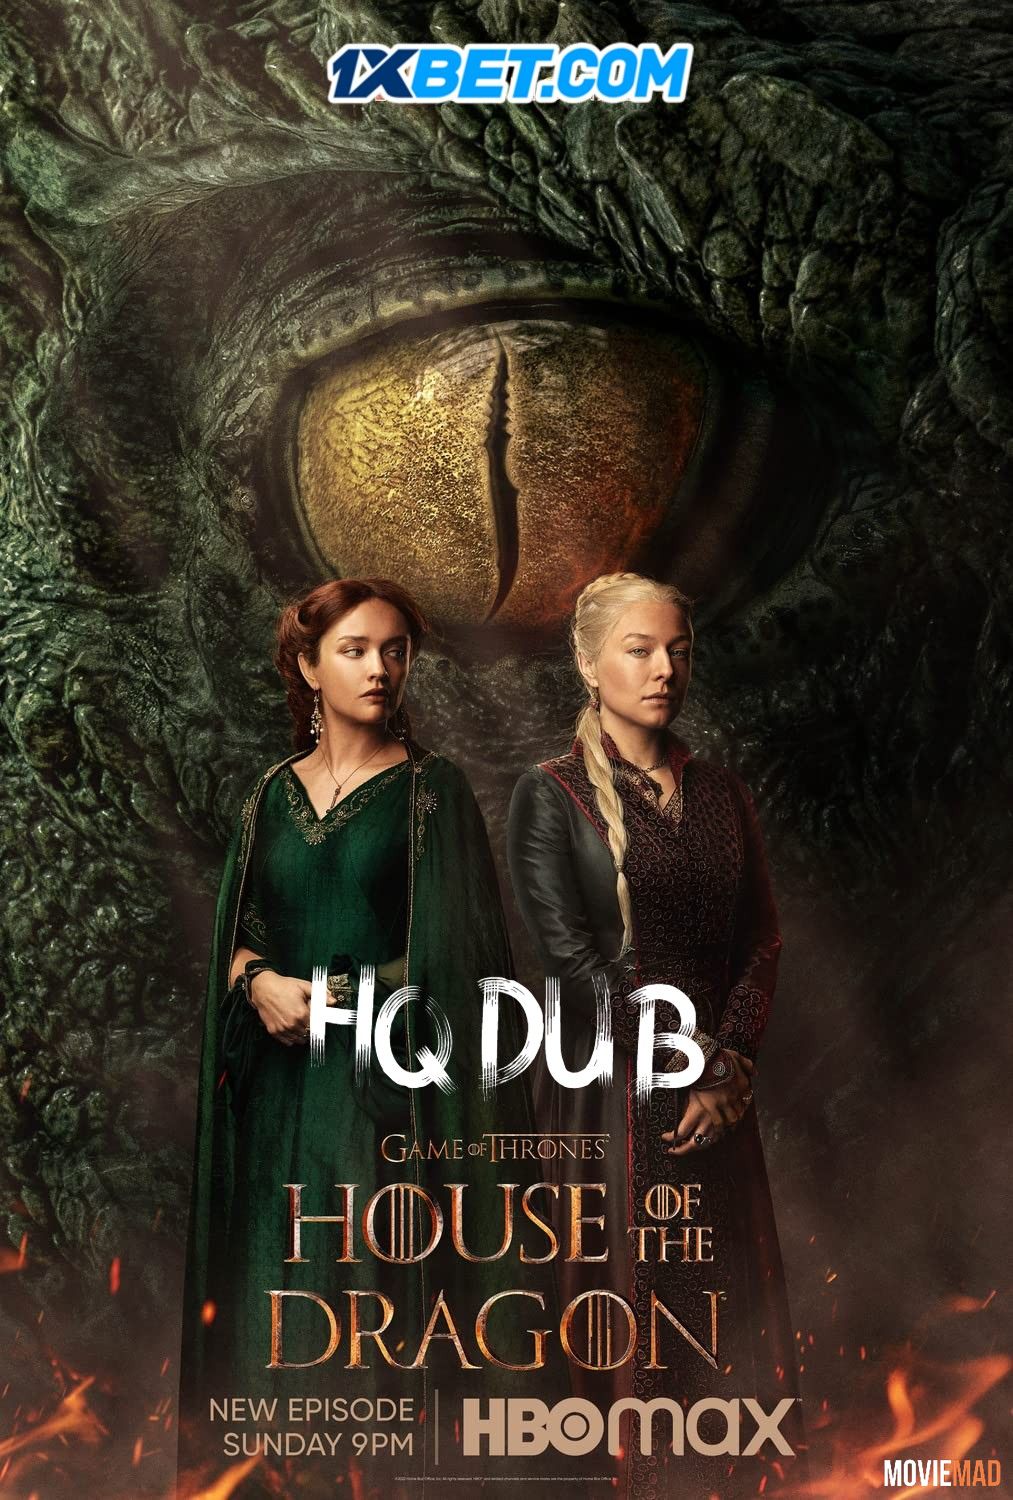 House Of The Dragon S01E09 (2022) Hindi (Voice Over) Dubbed HBOMAX HDRip 1080p 720p 480p